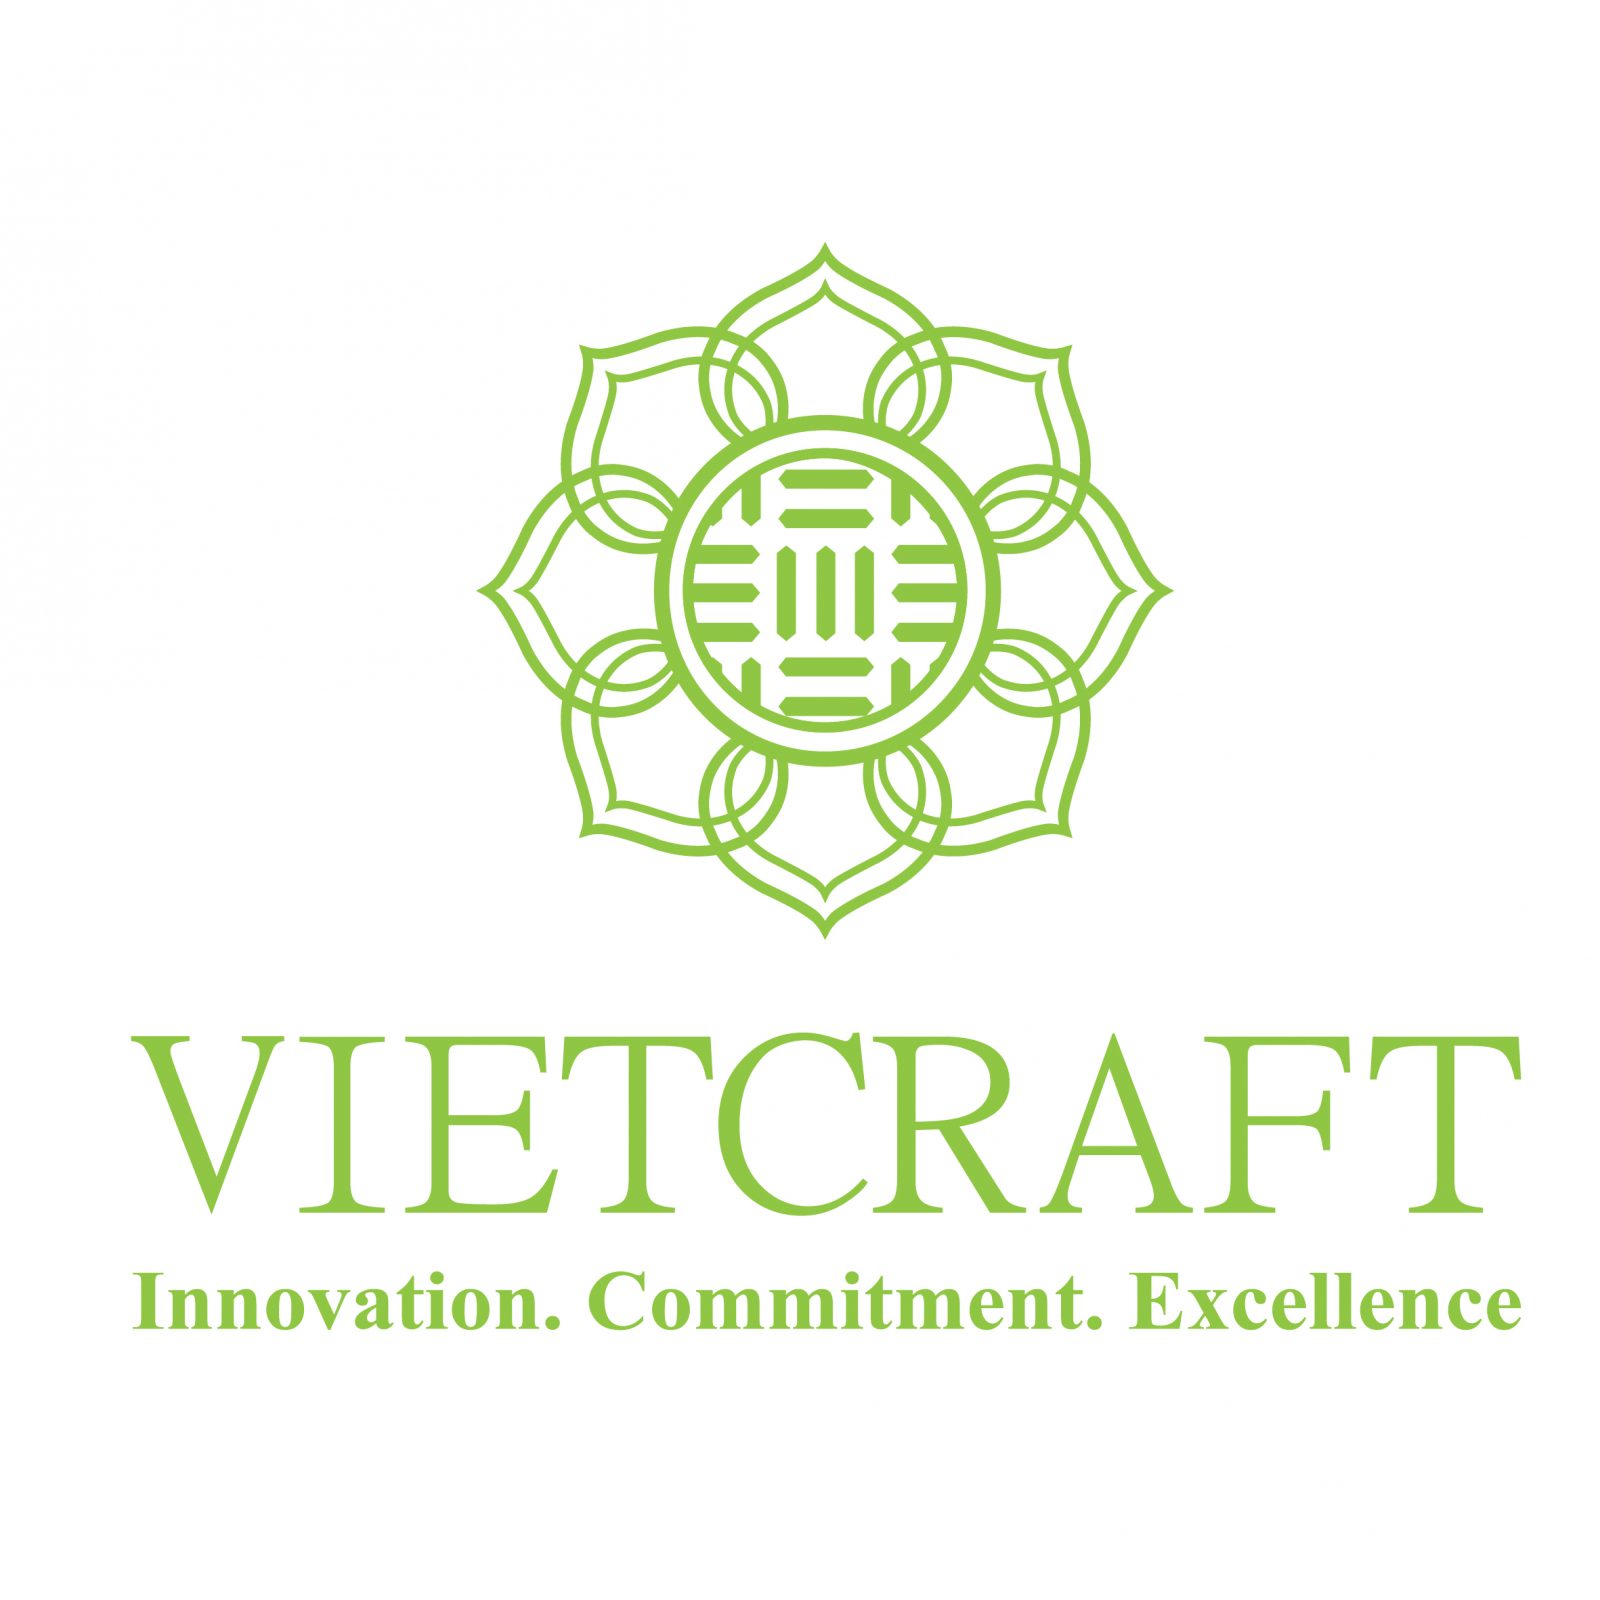 The Vietcraft logo outlines their innovation, commitment and excellence